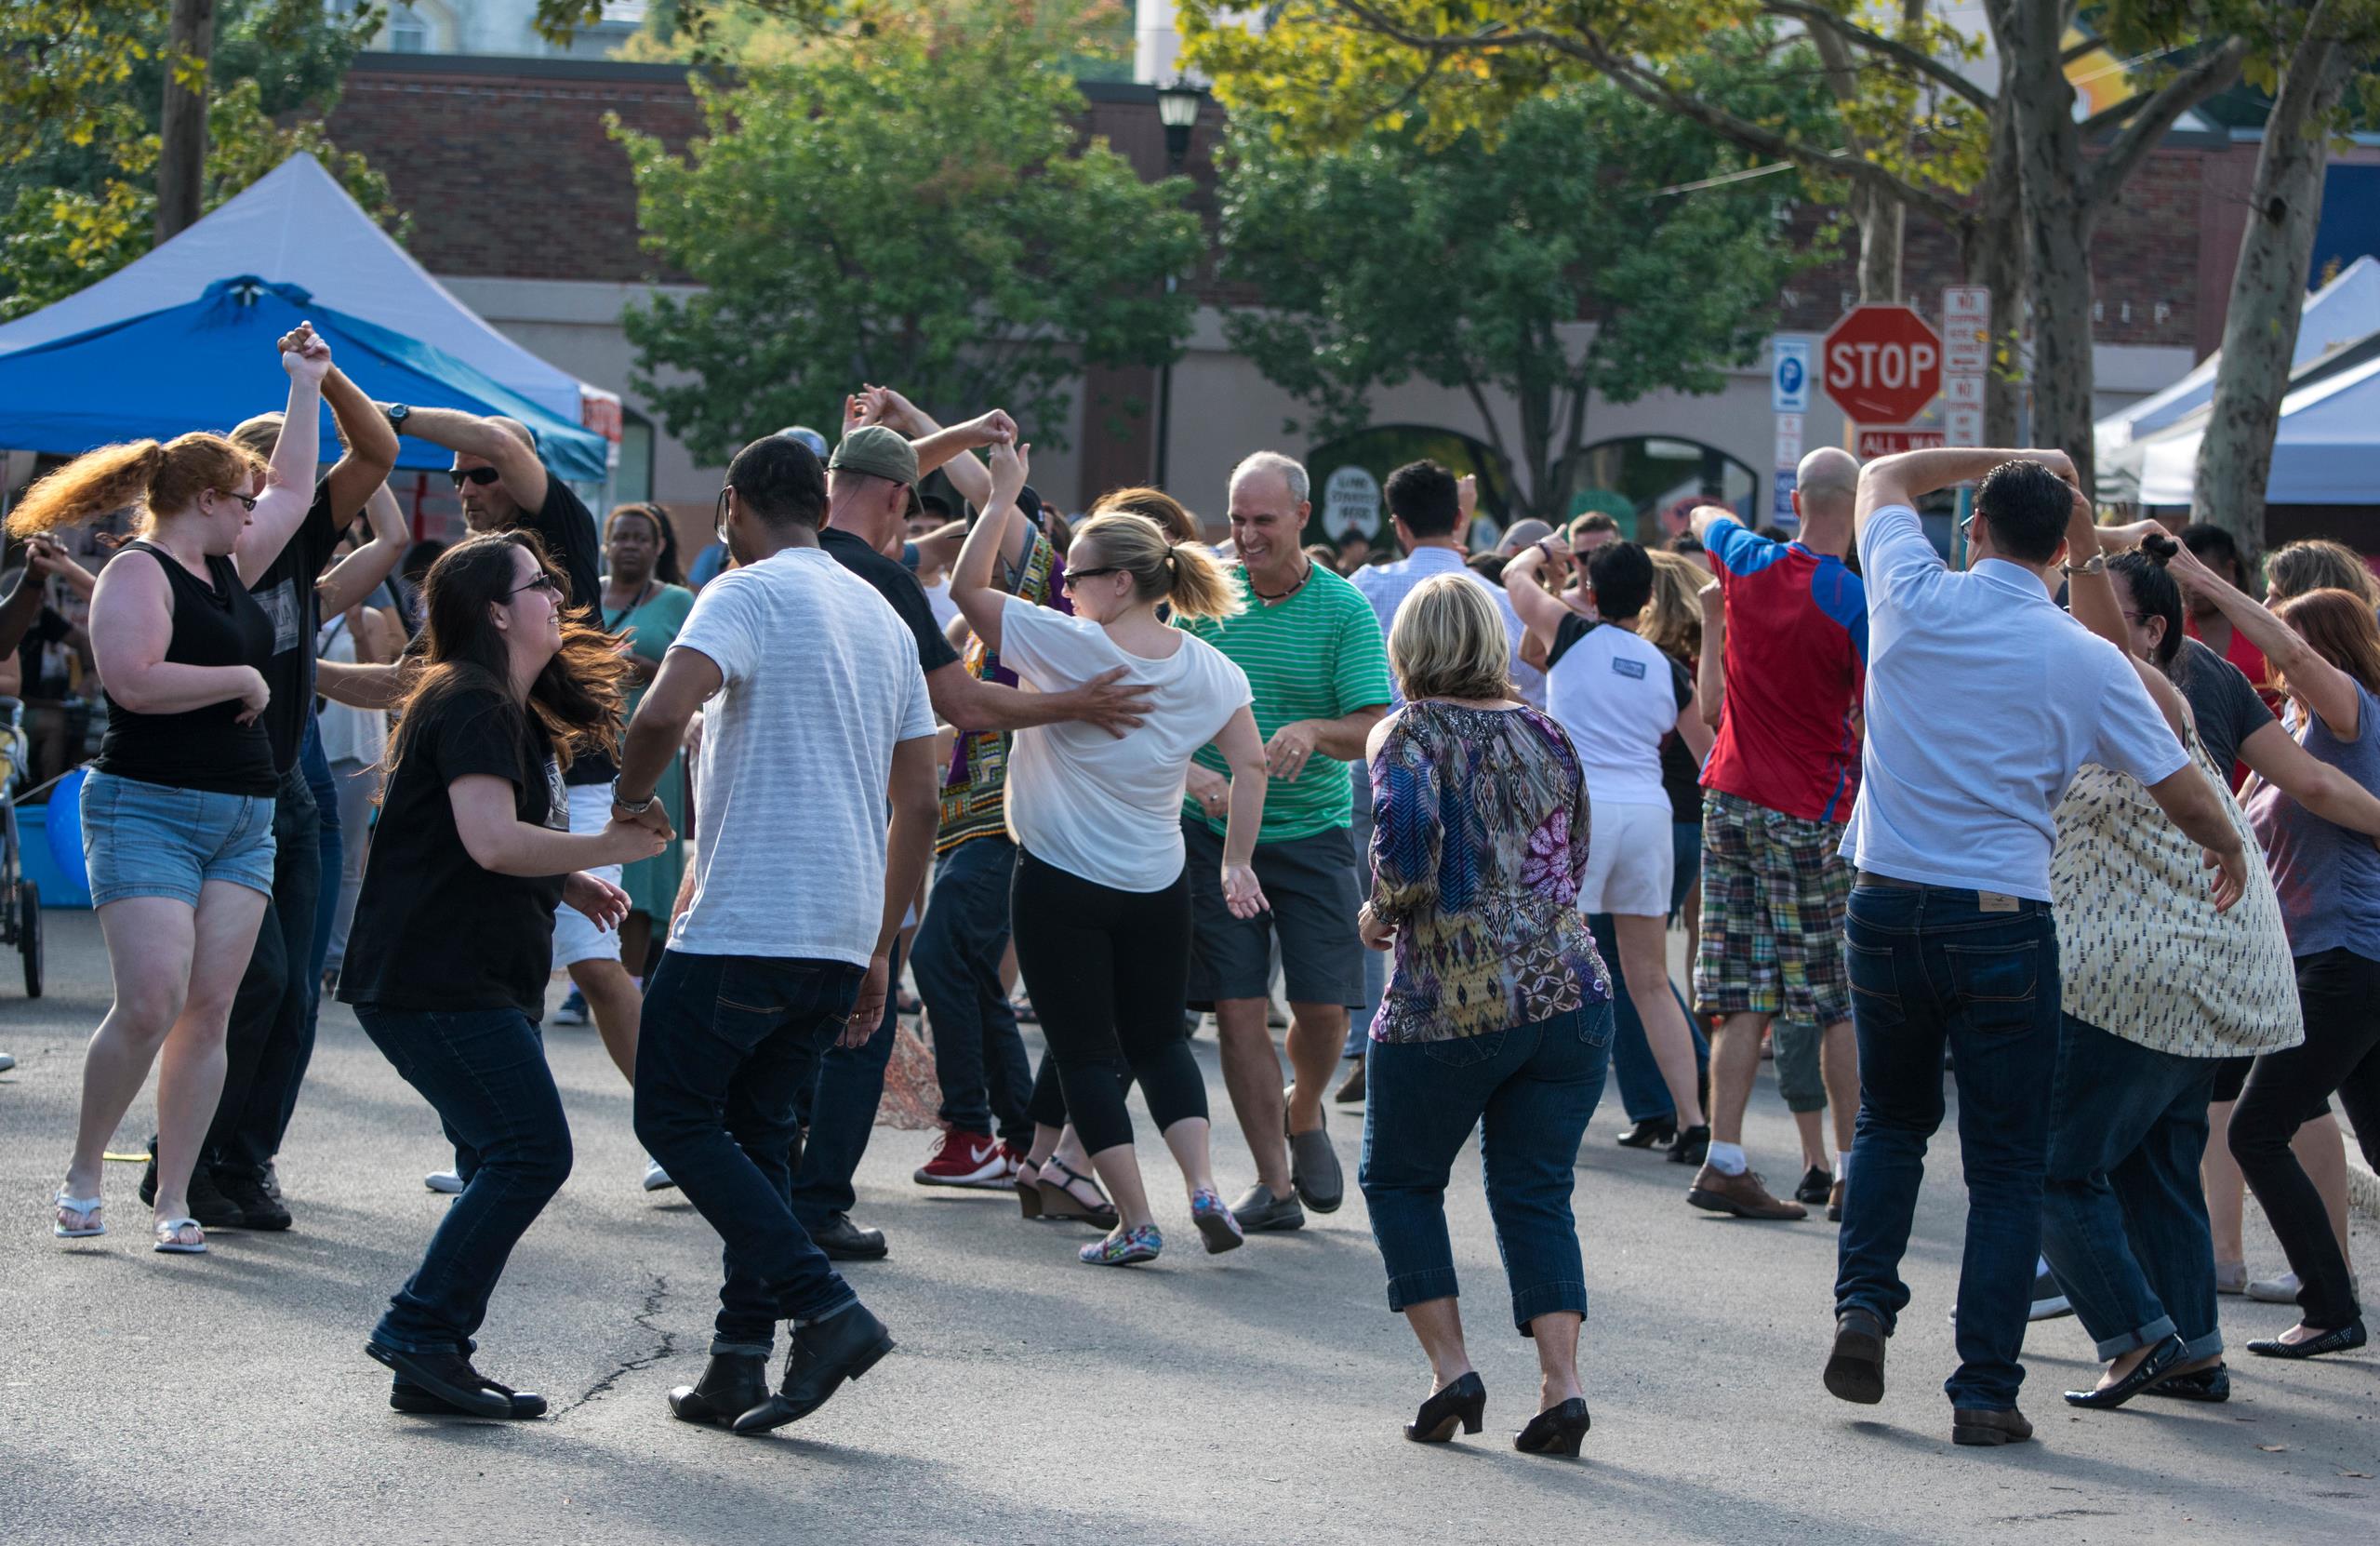 Group of people dancing at a street party